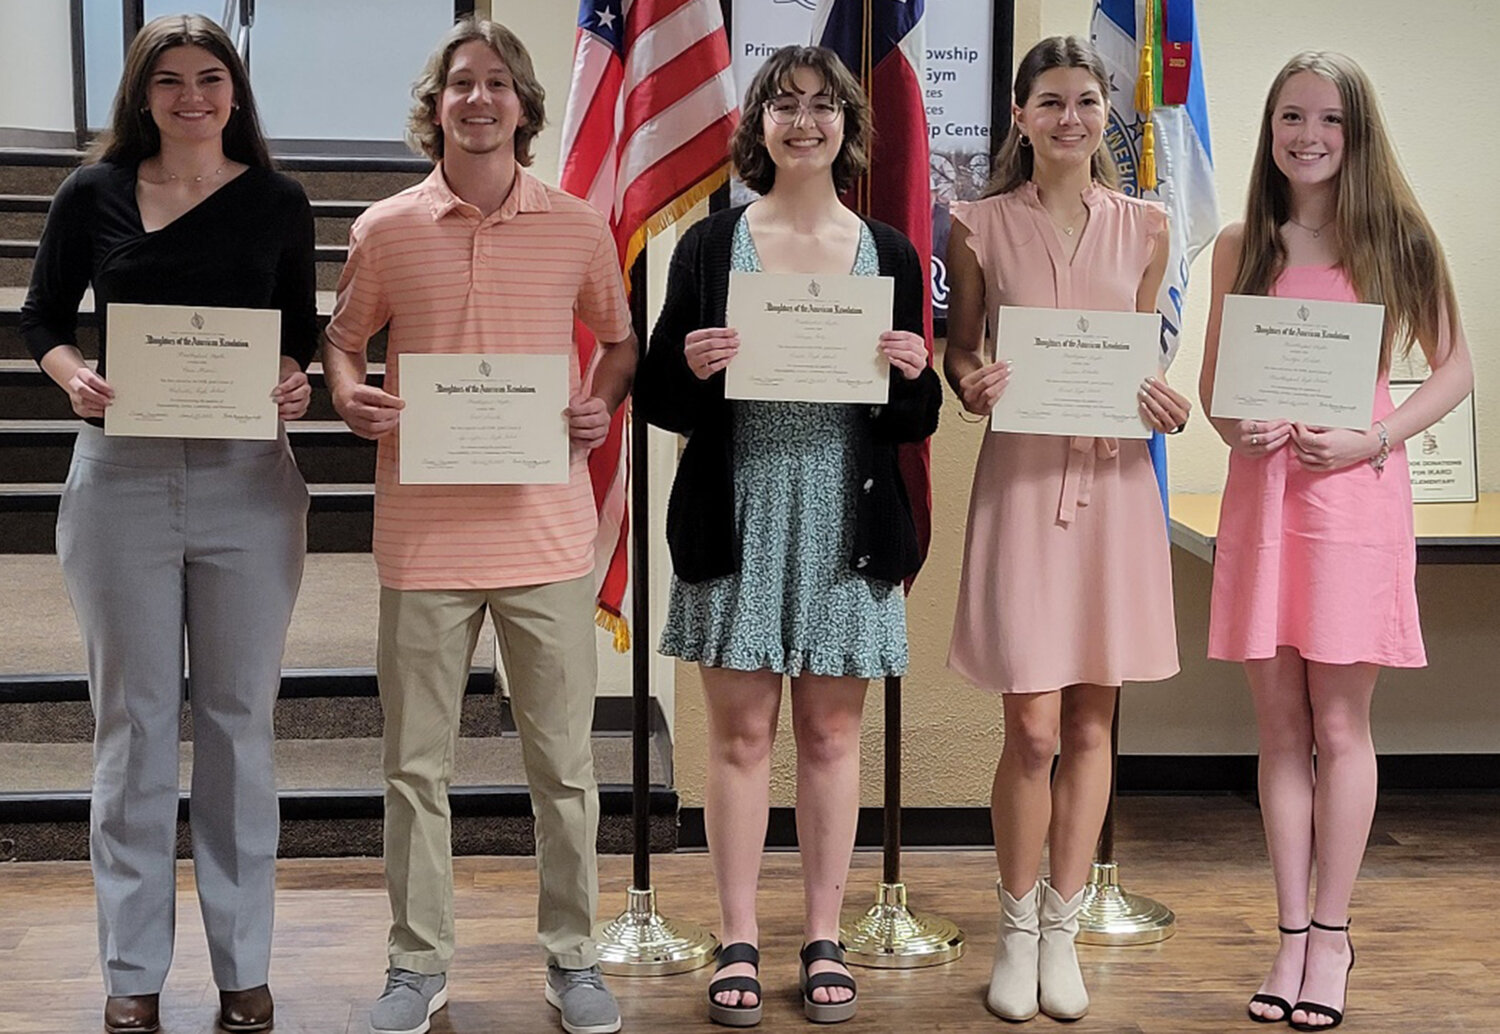 Weatherford DAR Good Citizen Award winners shown are (from left) Roree Willis, Todd Smith, Addisyn Retz, Addison Roberts, and Kaitlyn Pickett. Not shown are Payne Wellman and Conner Kirchhefer.